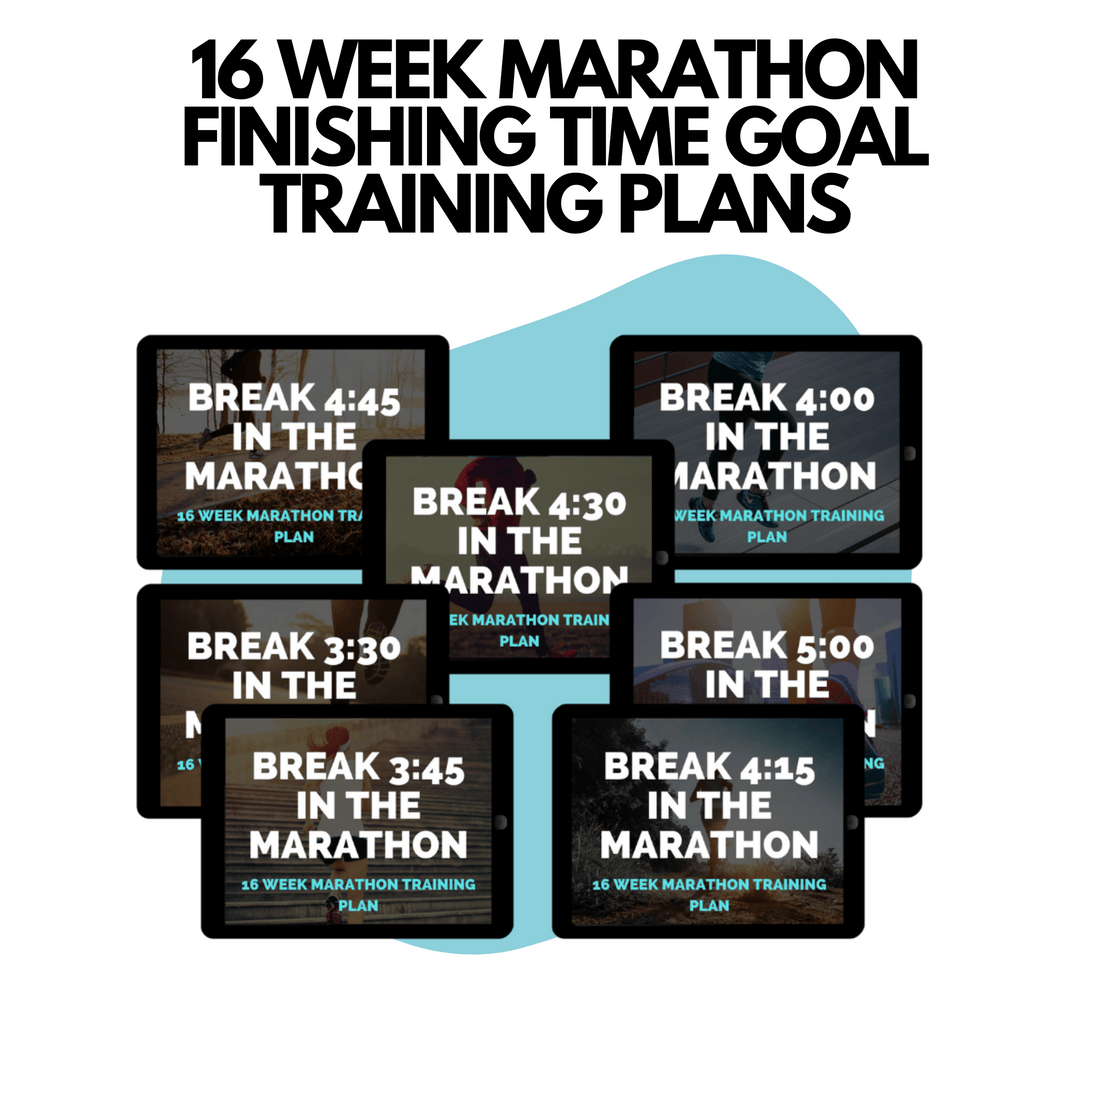 A Mockup of all the 16 Week Marathon Training Finishing Time Goal Plans that are offered